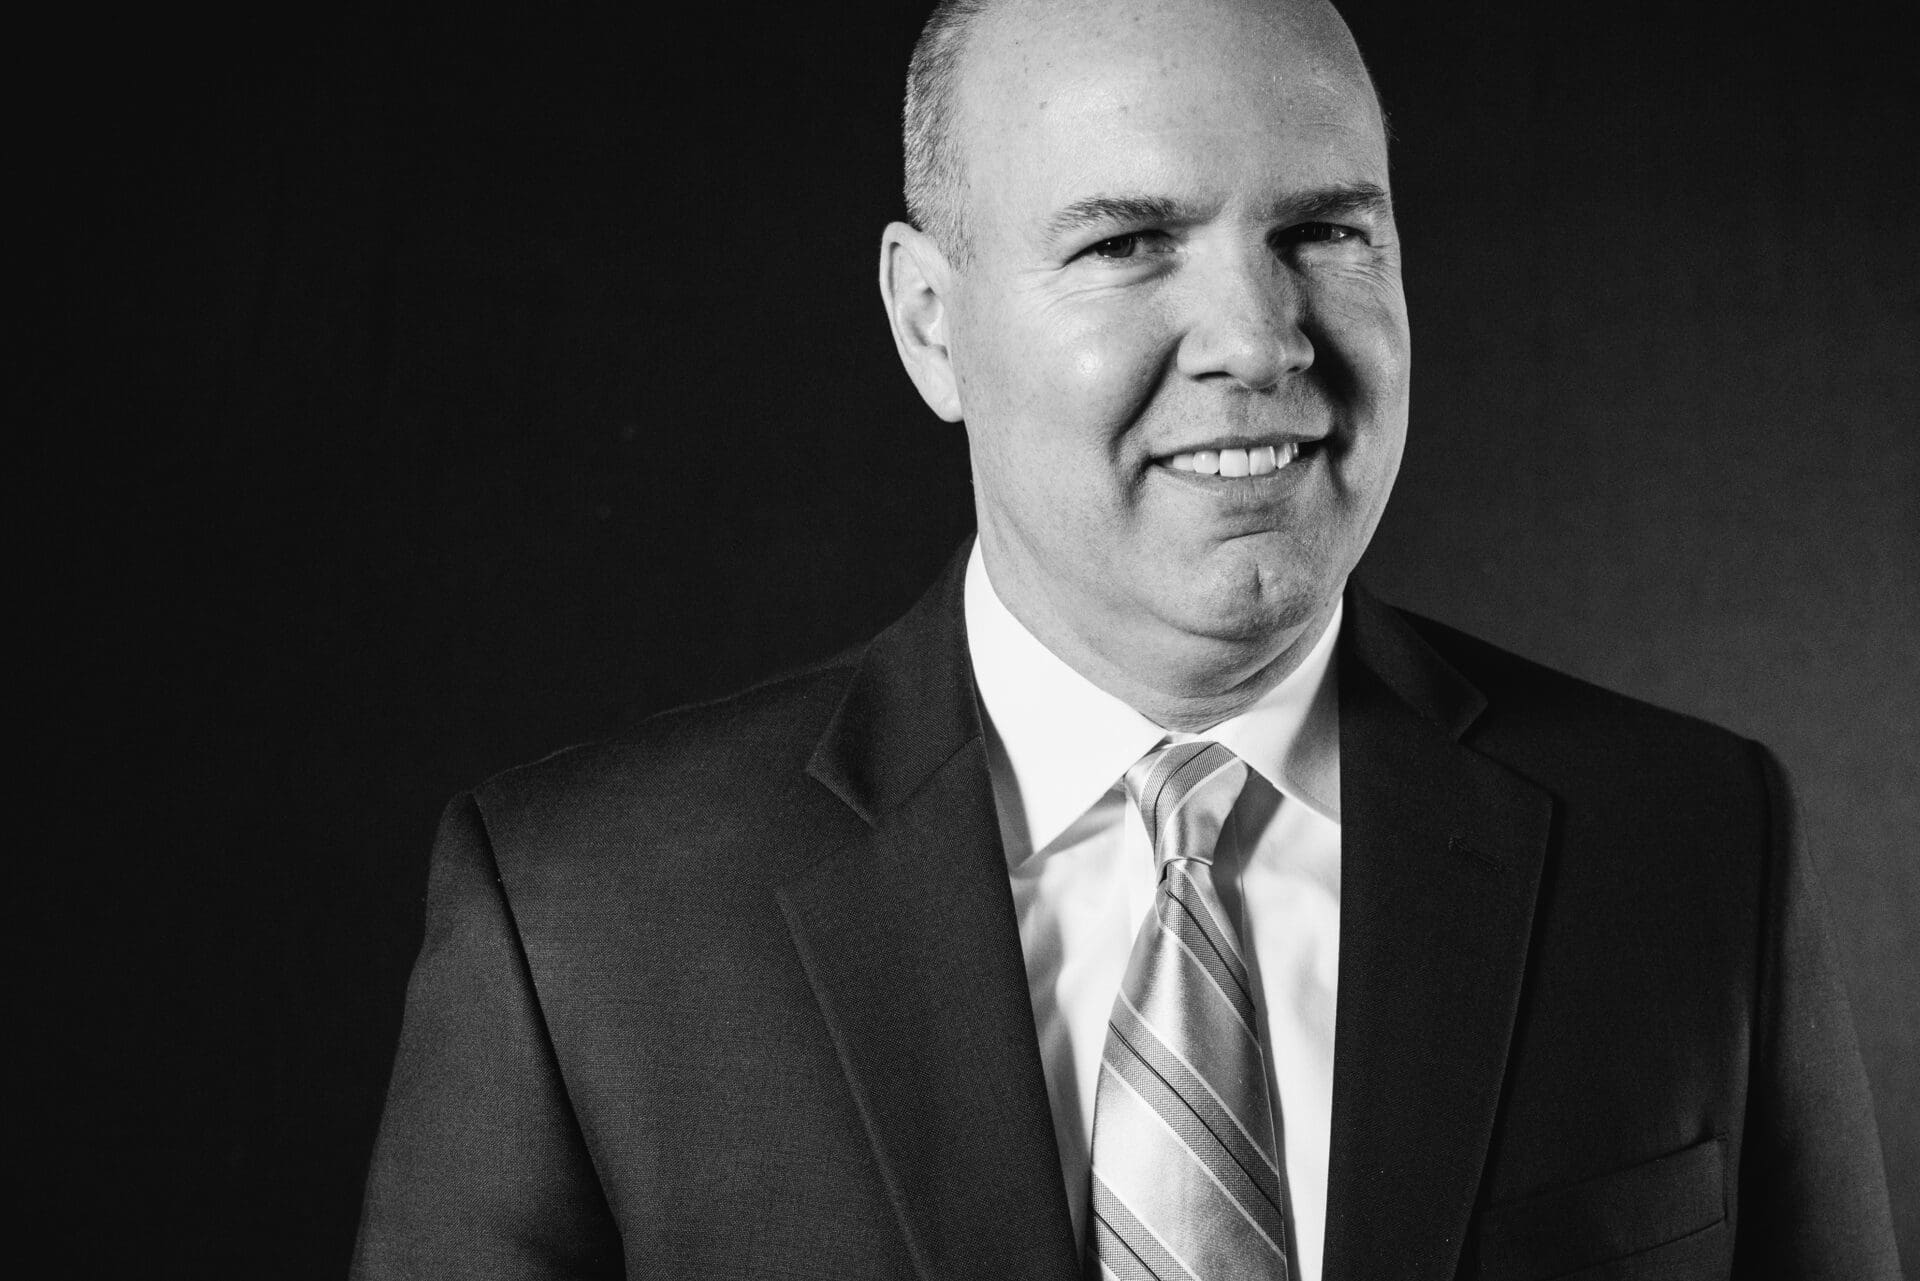 A gray photo of a man wearing a business suit